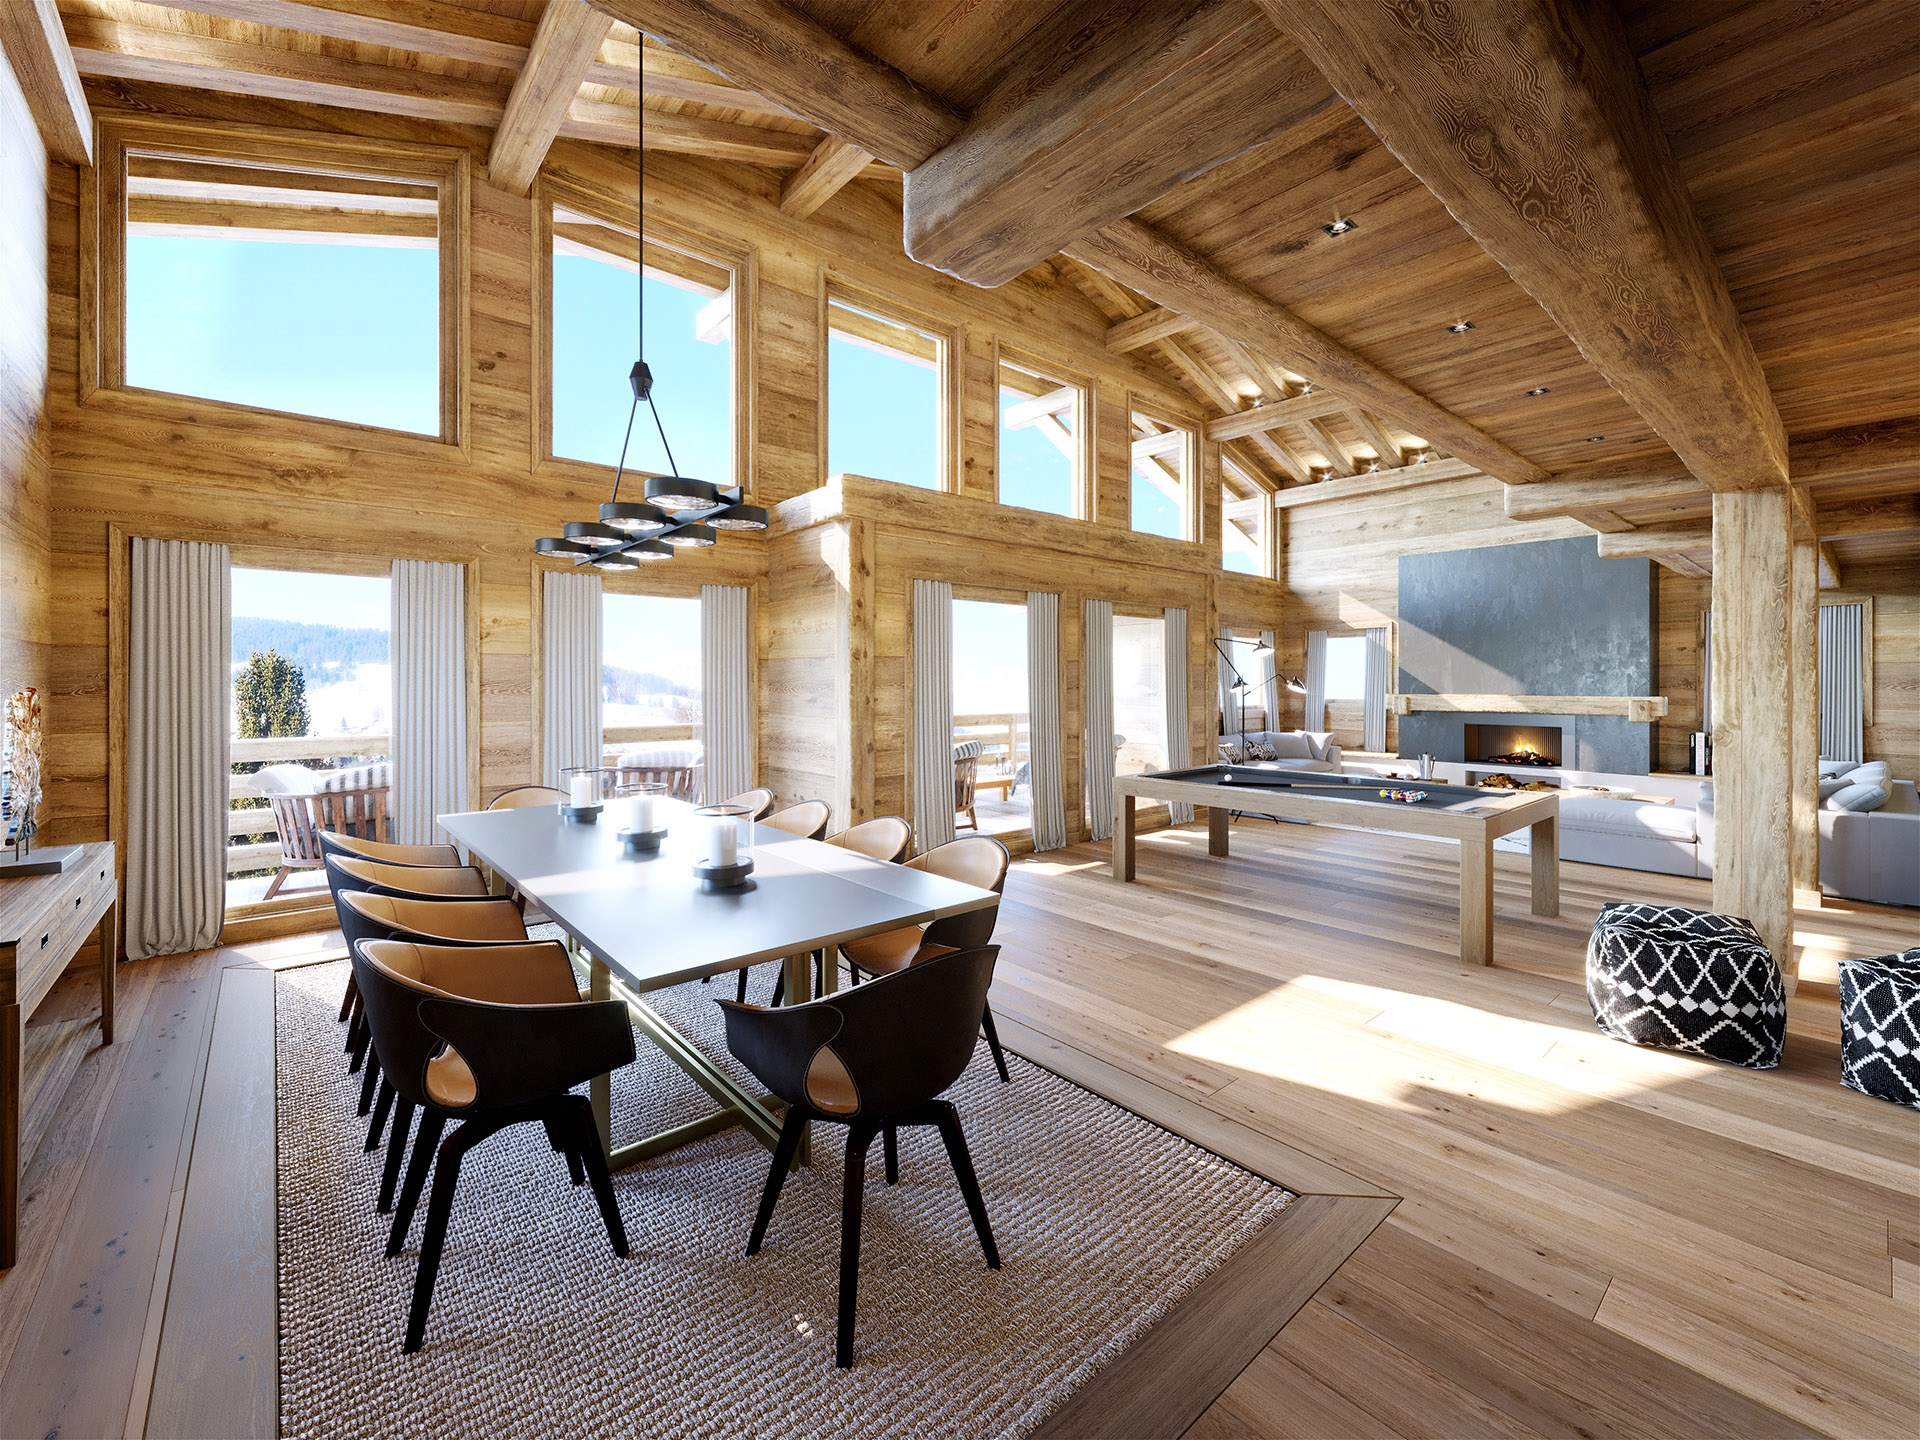 3D graphics of a rustic and modern mountain chalet